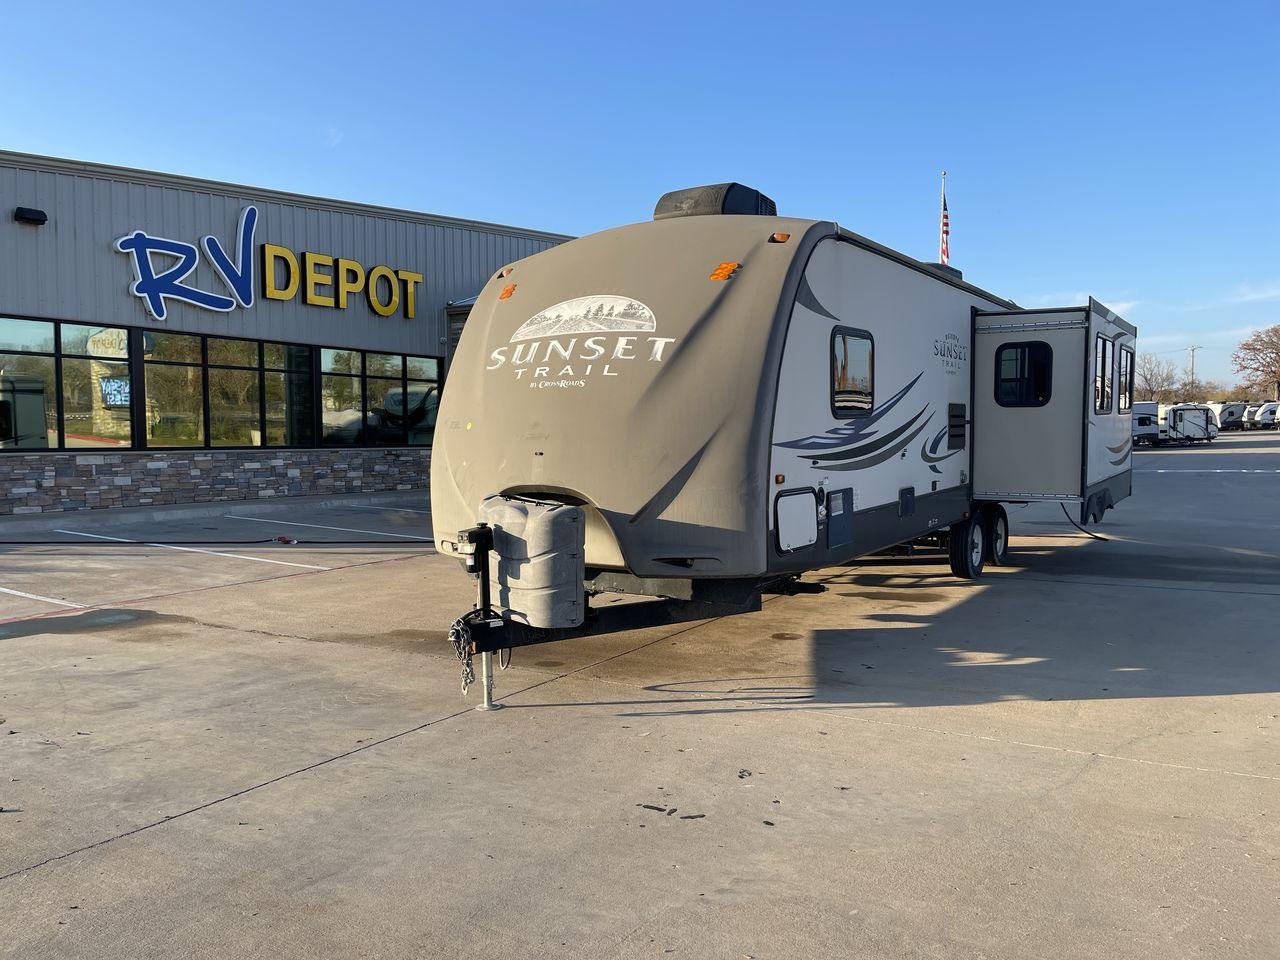 2013 TAN SUNSET TRAIL 30RE - (4V0TC3029DB) , Length: 34.42 ft.| Dry Weight: 6,288 lbs. | Gross Weight: 9,500 lbs. | Slides: 1 transmission, located at 4319 N Main St, Cleburne, TX, 76033, (817) 678-5133, 32.385960, -97.391212 - The 2013 Sunset Trail 30RE CT offers the ideal balance of comfort and flair. This travel trailer is 34.42 feet long, so there's plenty of room for you and your loved ones to relax. With a dry weight of 6,288 pounds and a gross weight of 9,500 pounds, it provides an excellent balance of durability an - Photo #0